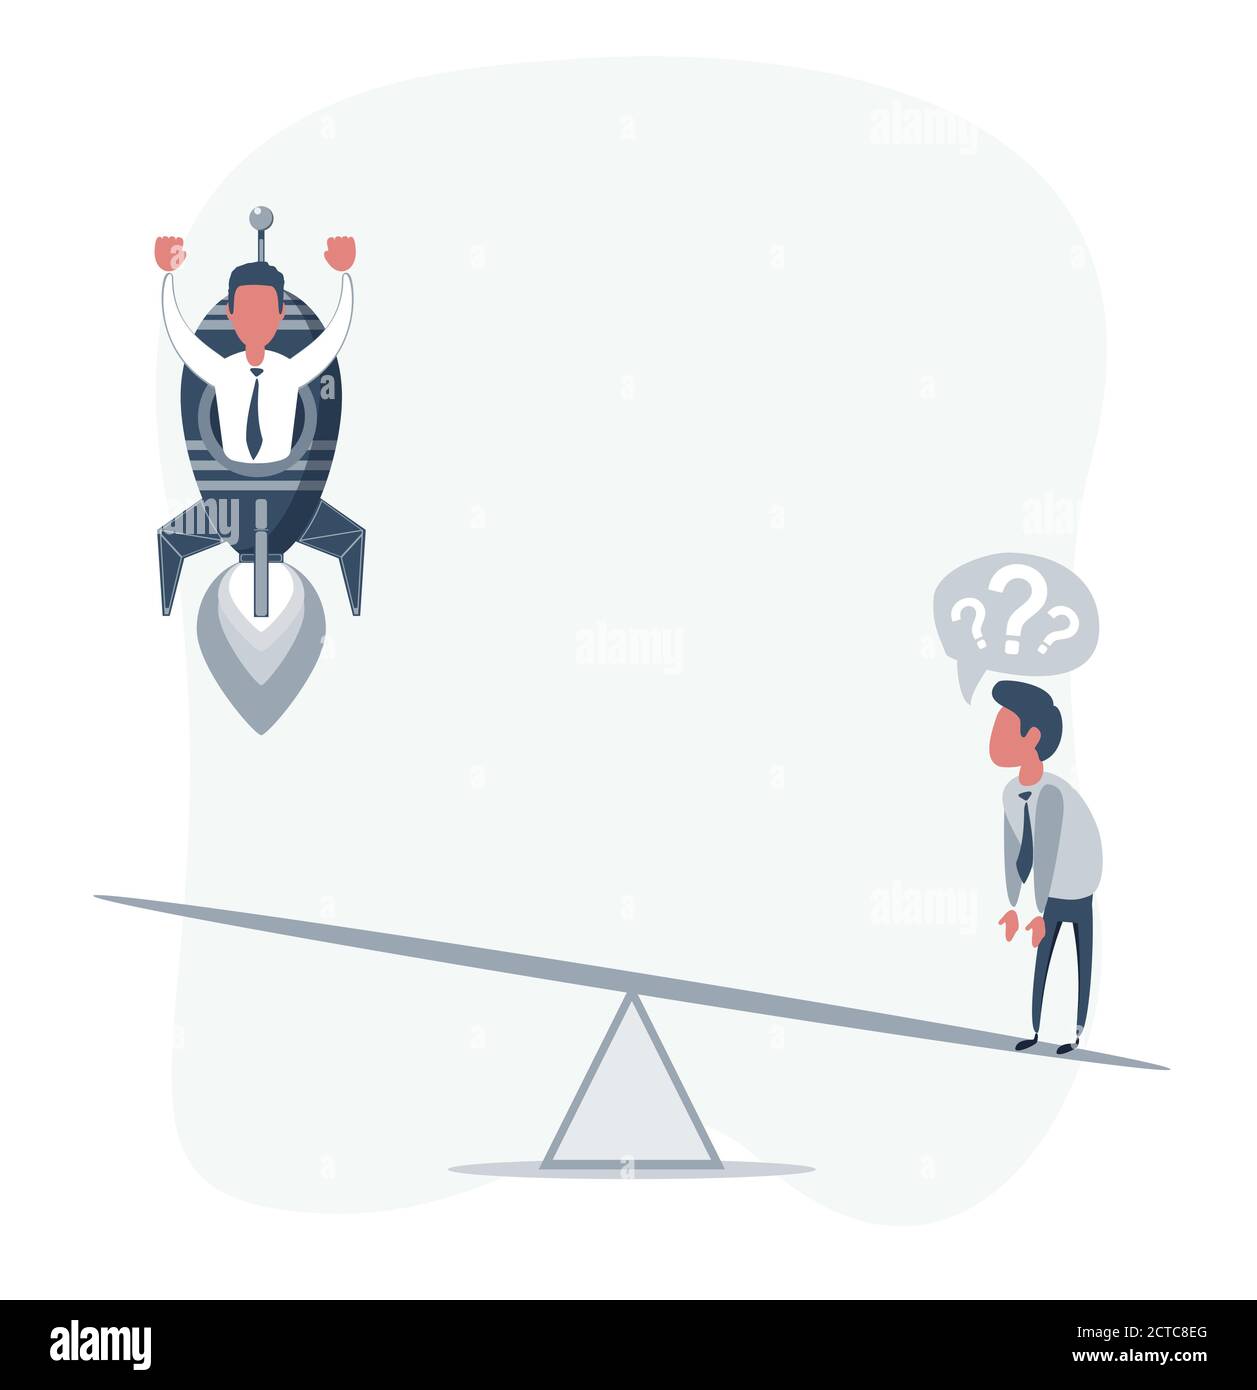 Business startup concept. Vector illustration with a businessman flying up on a rocket and a loser. Stock Vector